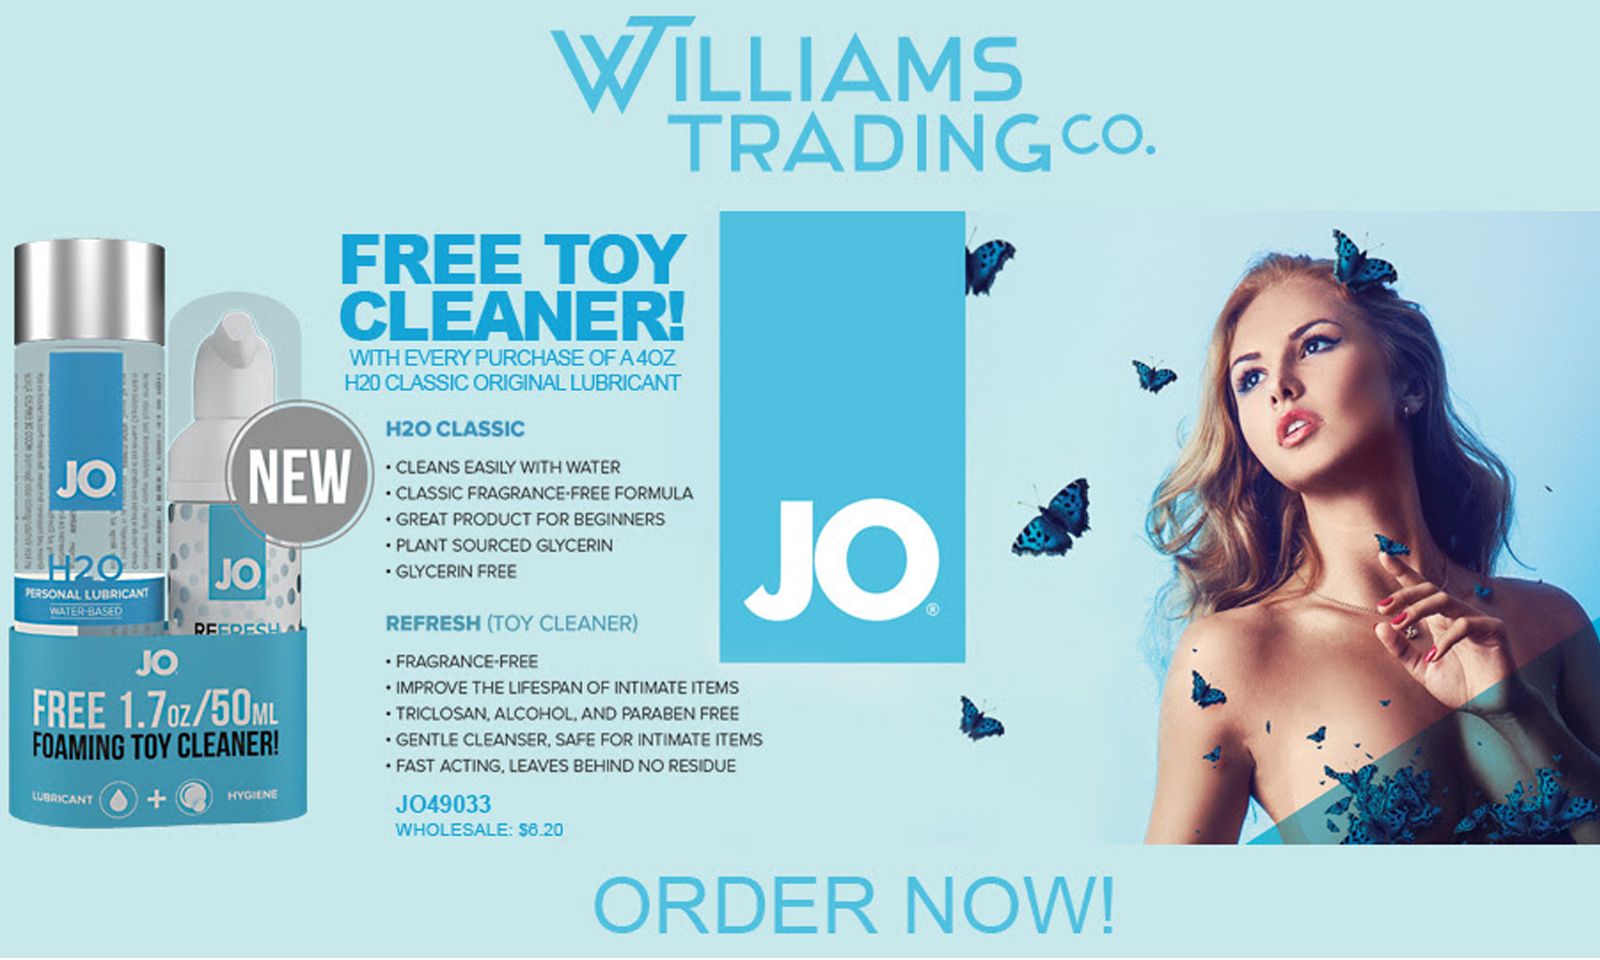 Williams Trading Co Launches System Jo Free Toy Cleaner Offer